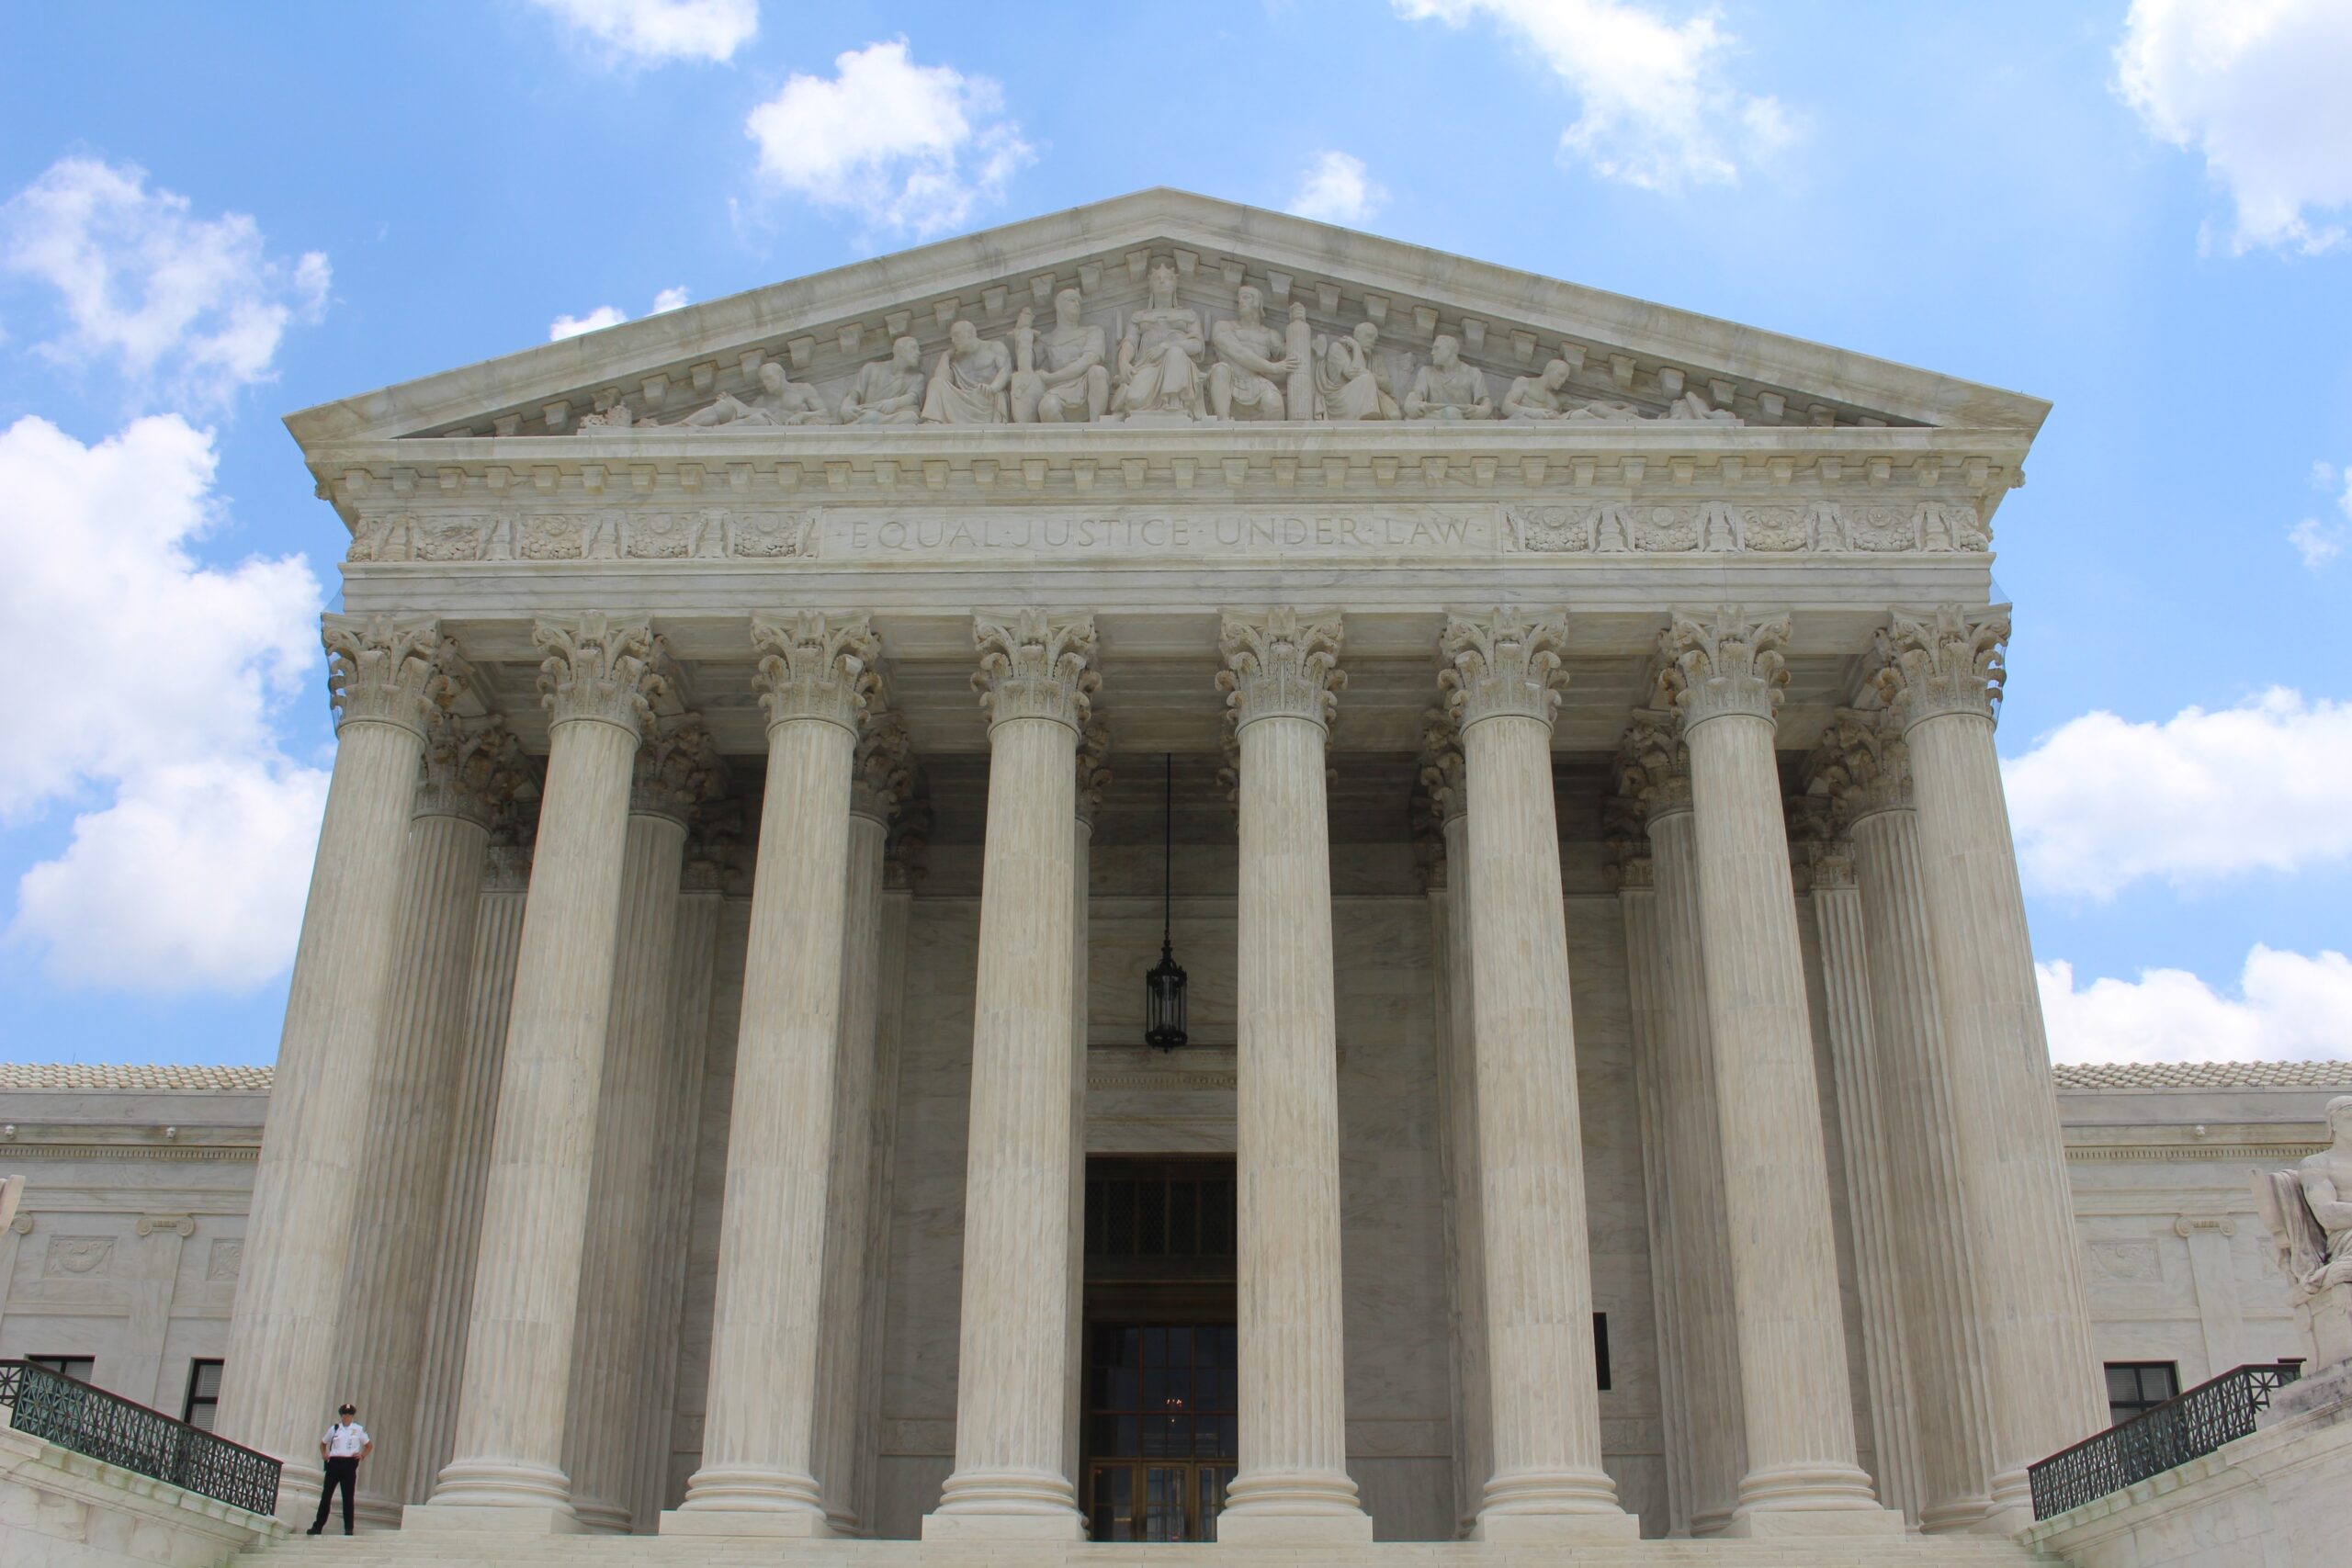 This year, the U.S. Supreme Court handed down two alarming decisions that will make it more difficult for innocent people to prove their wrongful convictions while they are imprisoned. (Image: Claire Anderson / Unsplash)